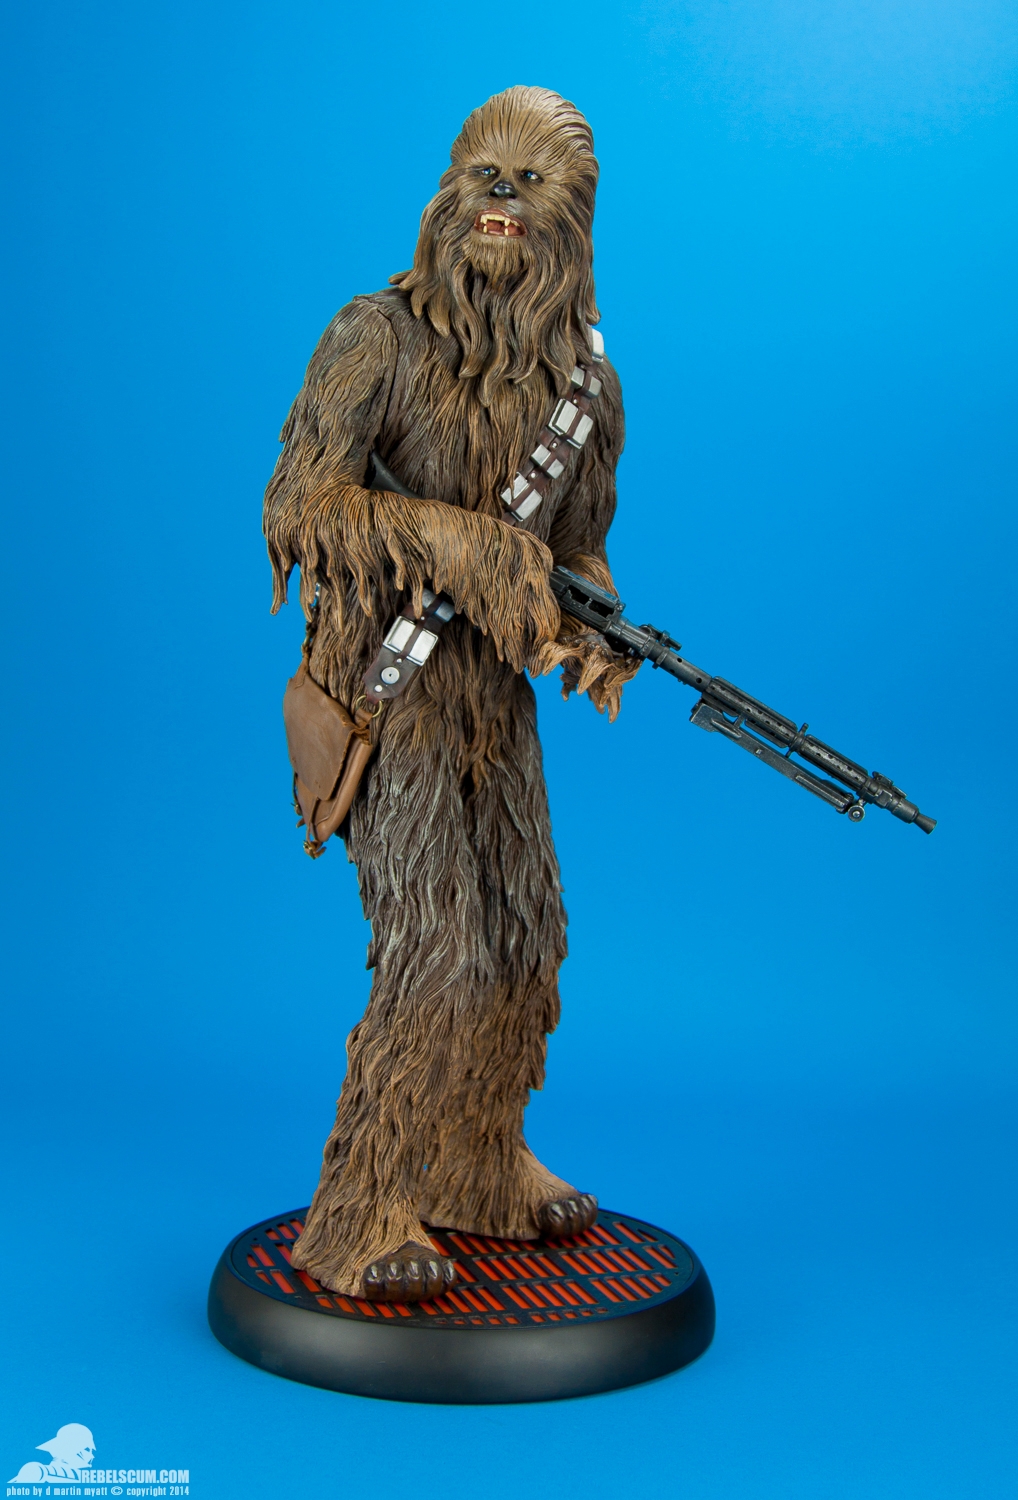 Chewbacca-Premium-Format-Figure-Sideshow-Collectibles-Exclusive-005.jpg